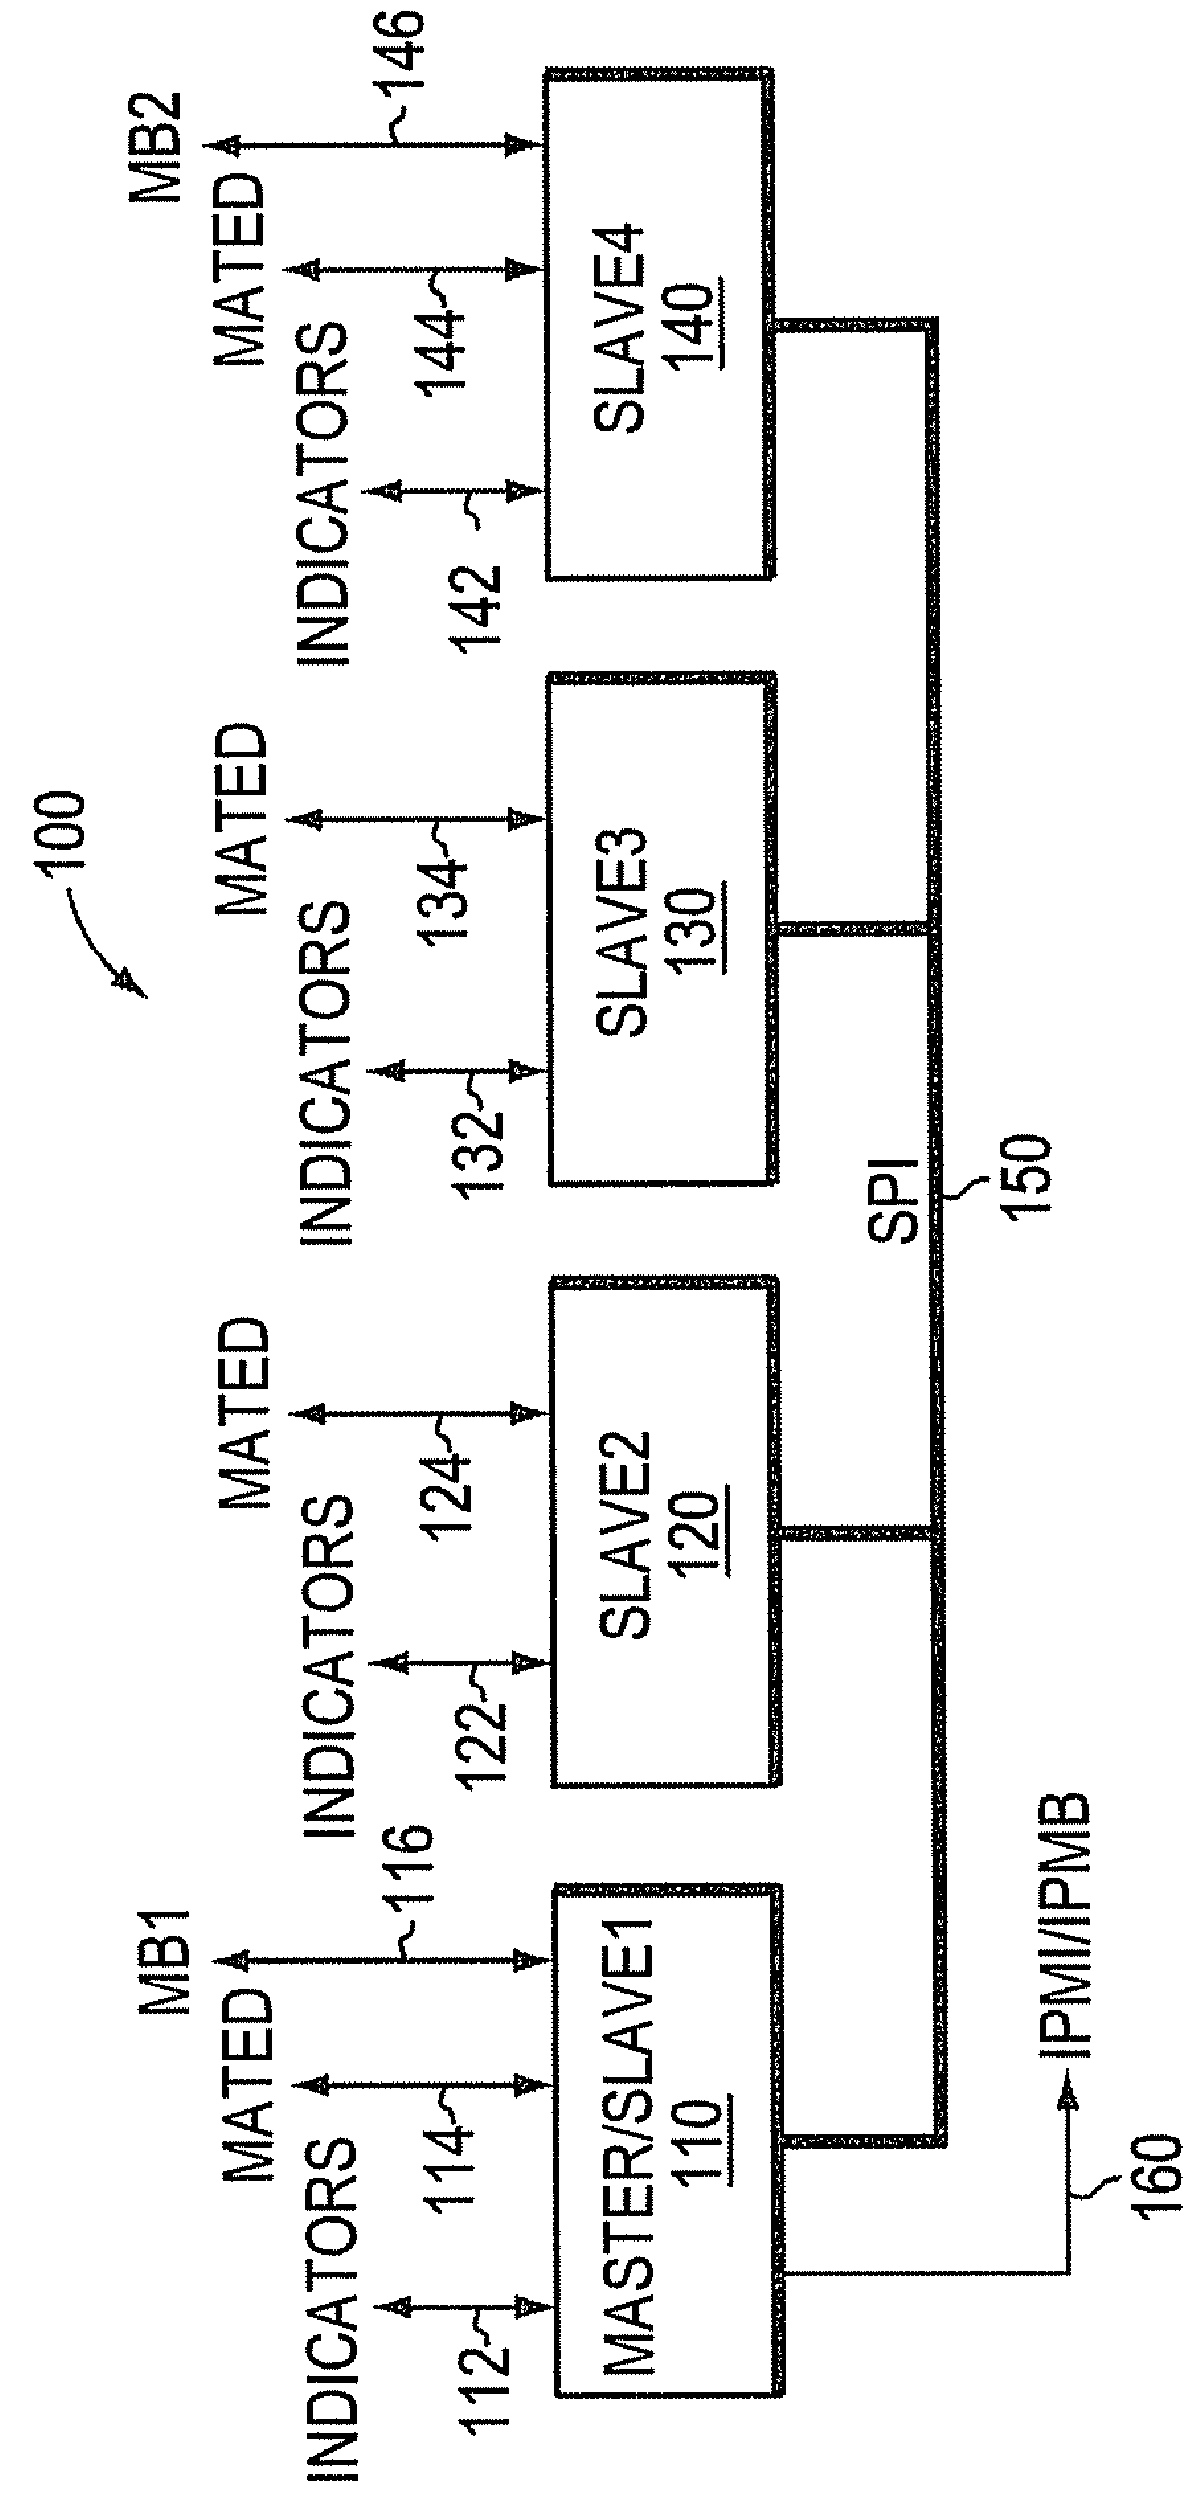 Drive mapping using a plurality of connected enclosure management controllers